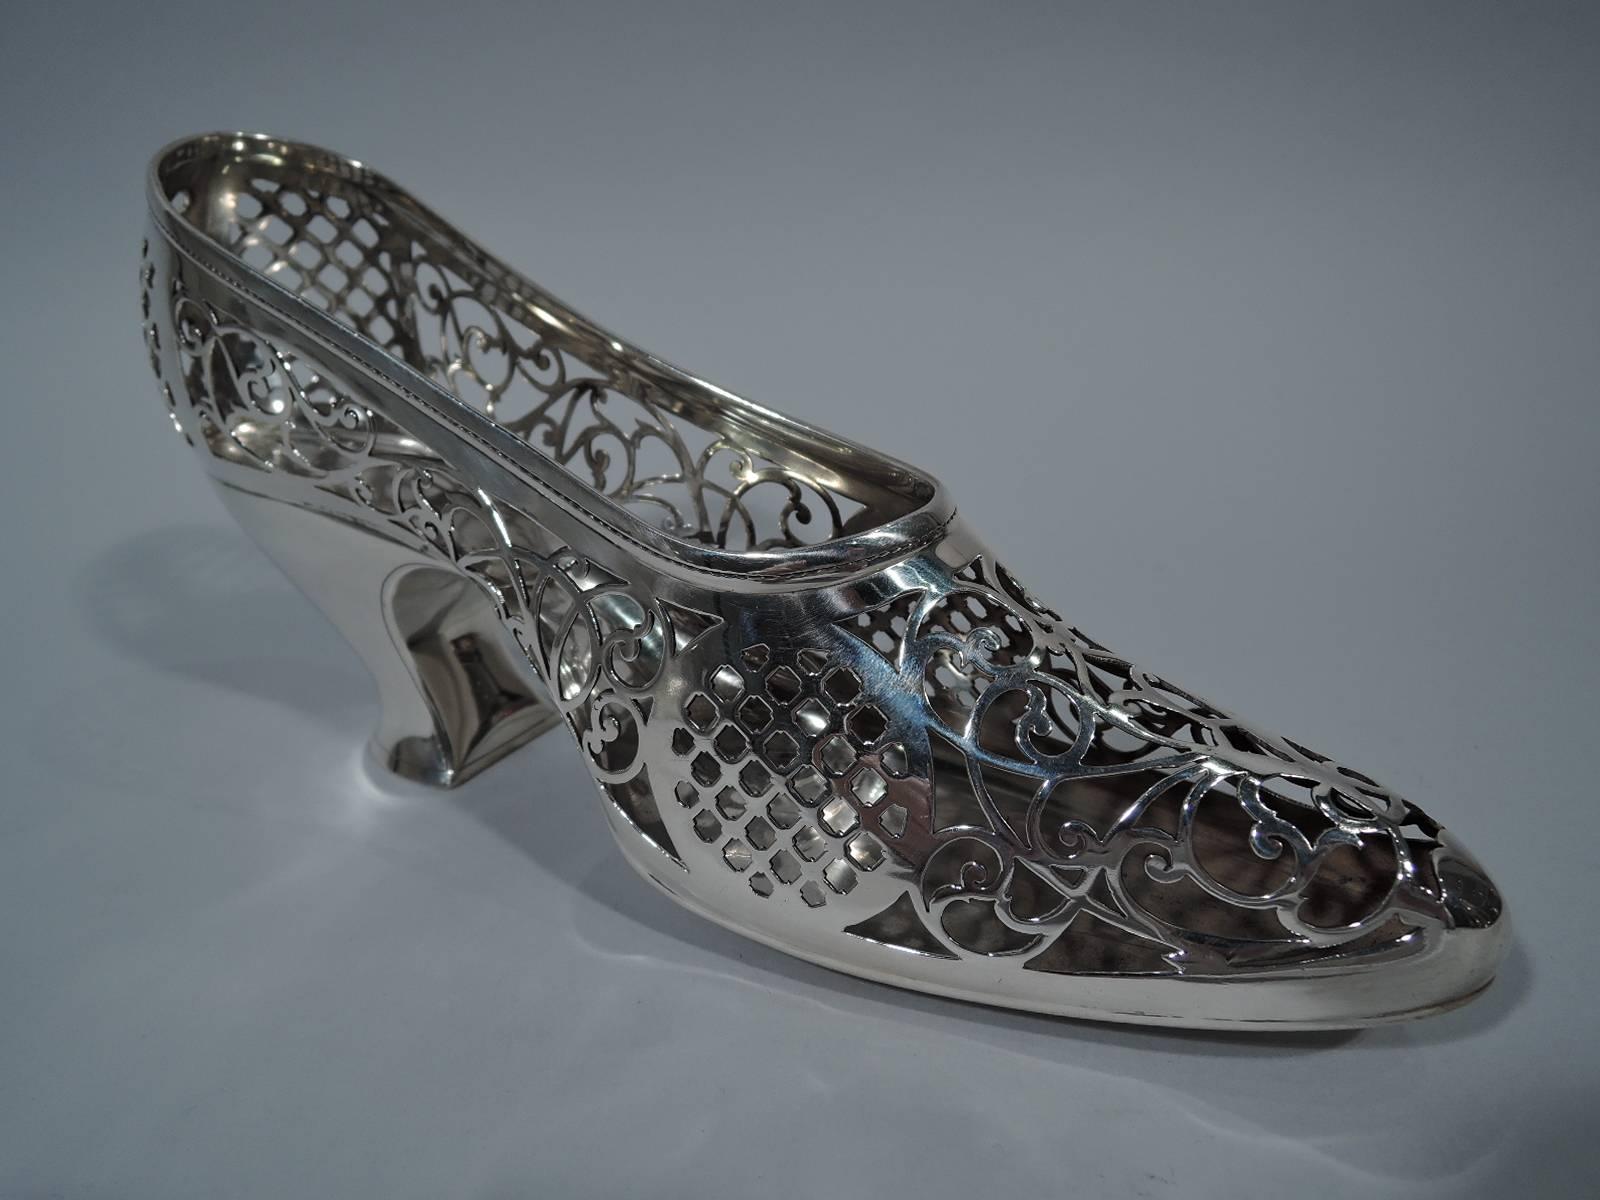 Edwardian sterling silver lady’s shoe. Made by Gorham in Providence, circa 1910. Pierced scrollwork and diaper as well as “stitched” seams. Sole and heel plain. An elegant boudoir accessory. Hallmark includes no. A5372. Weight: 9 troy ounces.